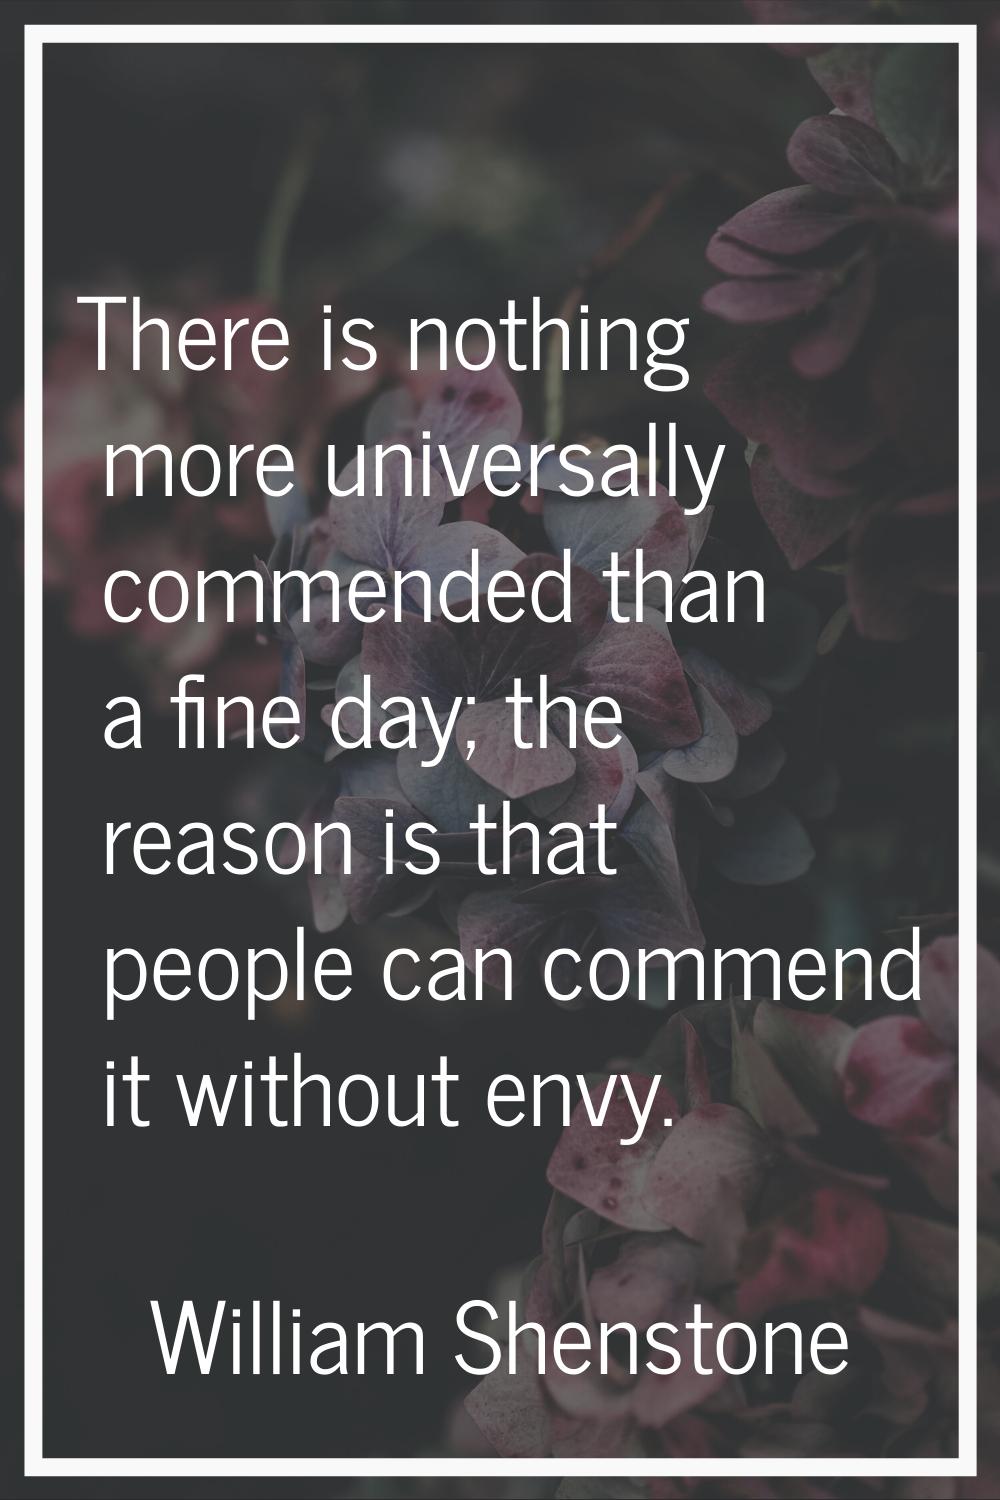 There is nothing more universally commended than a fine day; the reason is that people can commend 